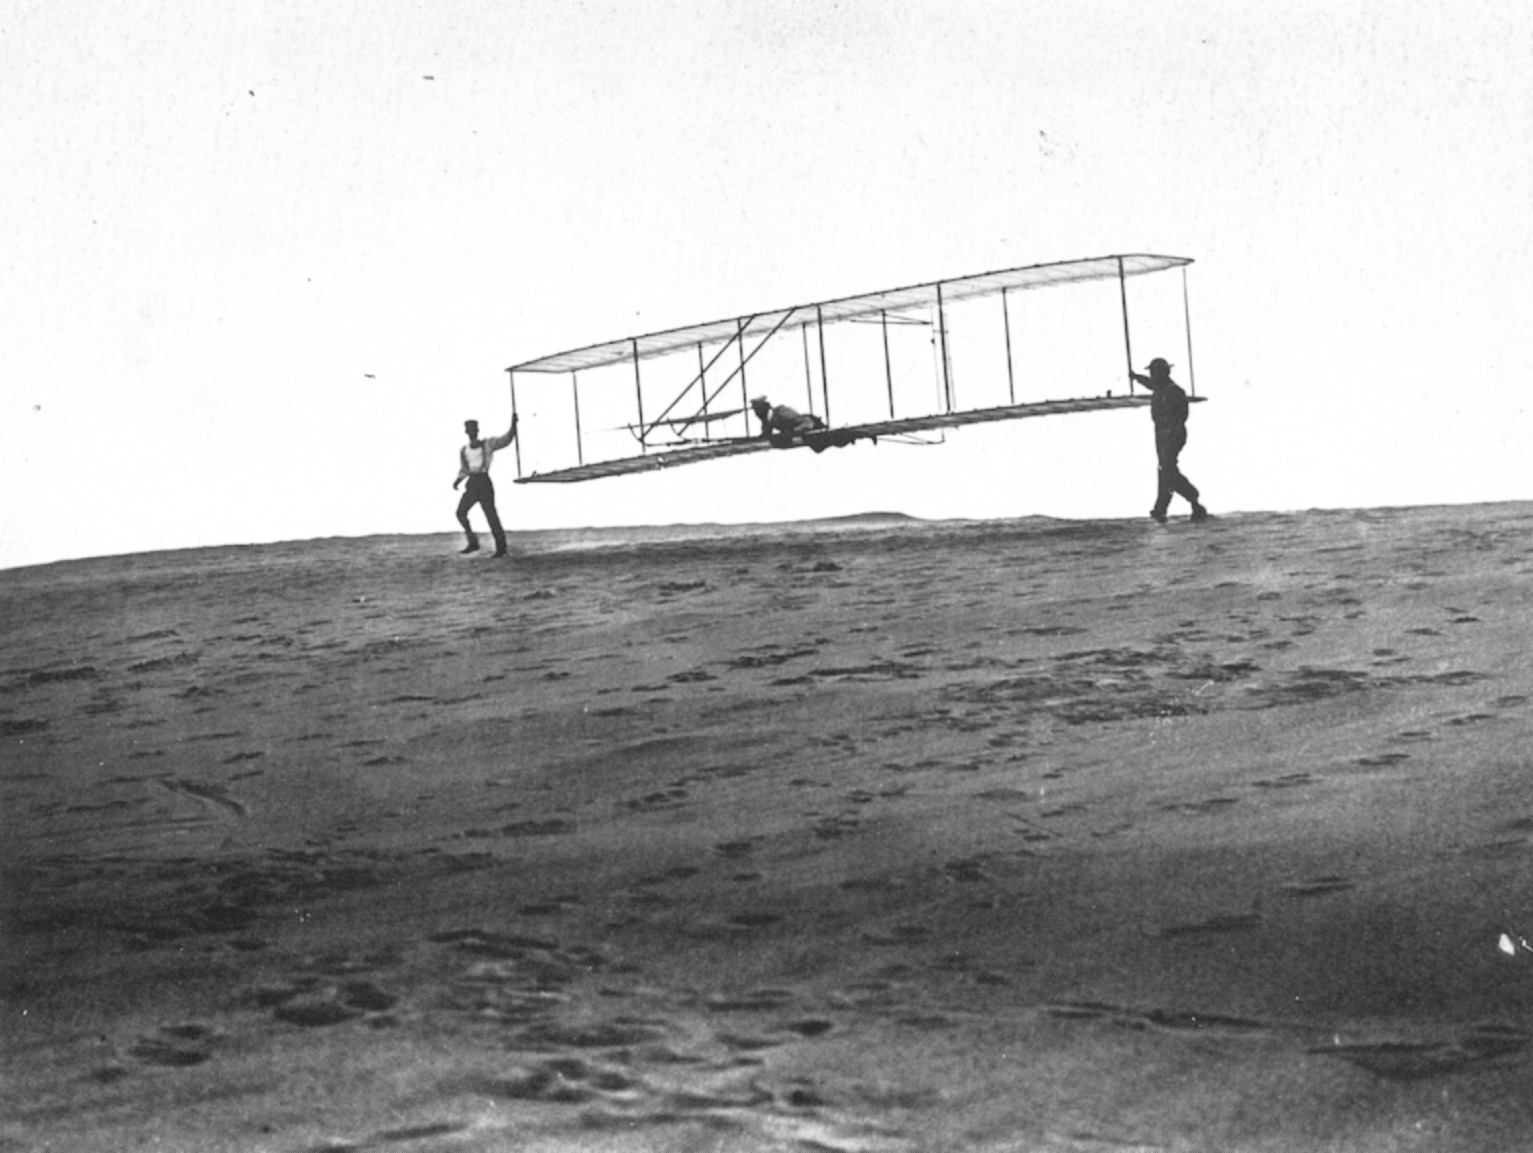 [Image: 1902_Glider_Launched.jpg]